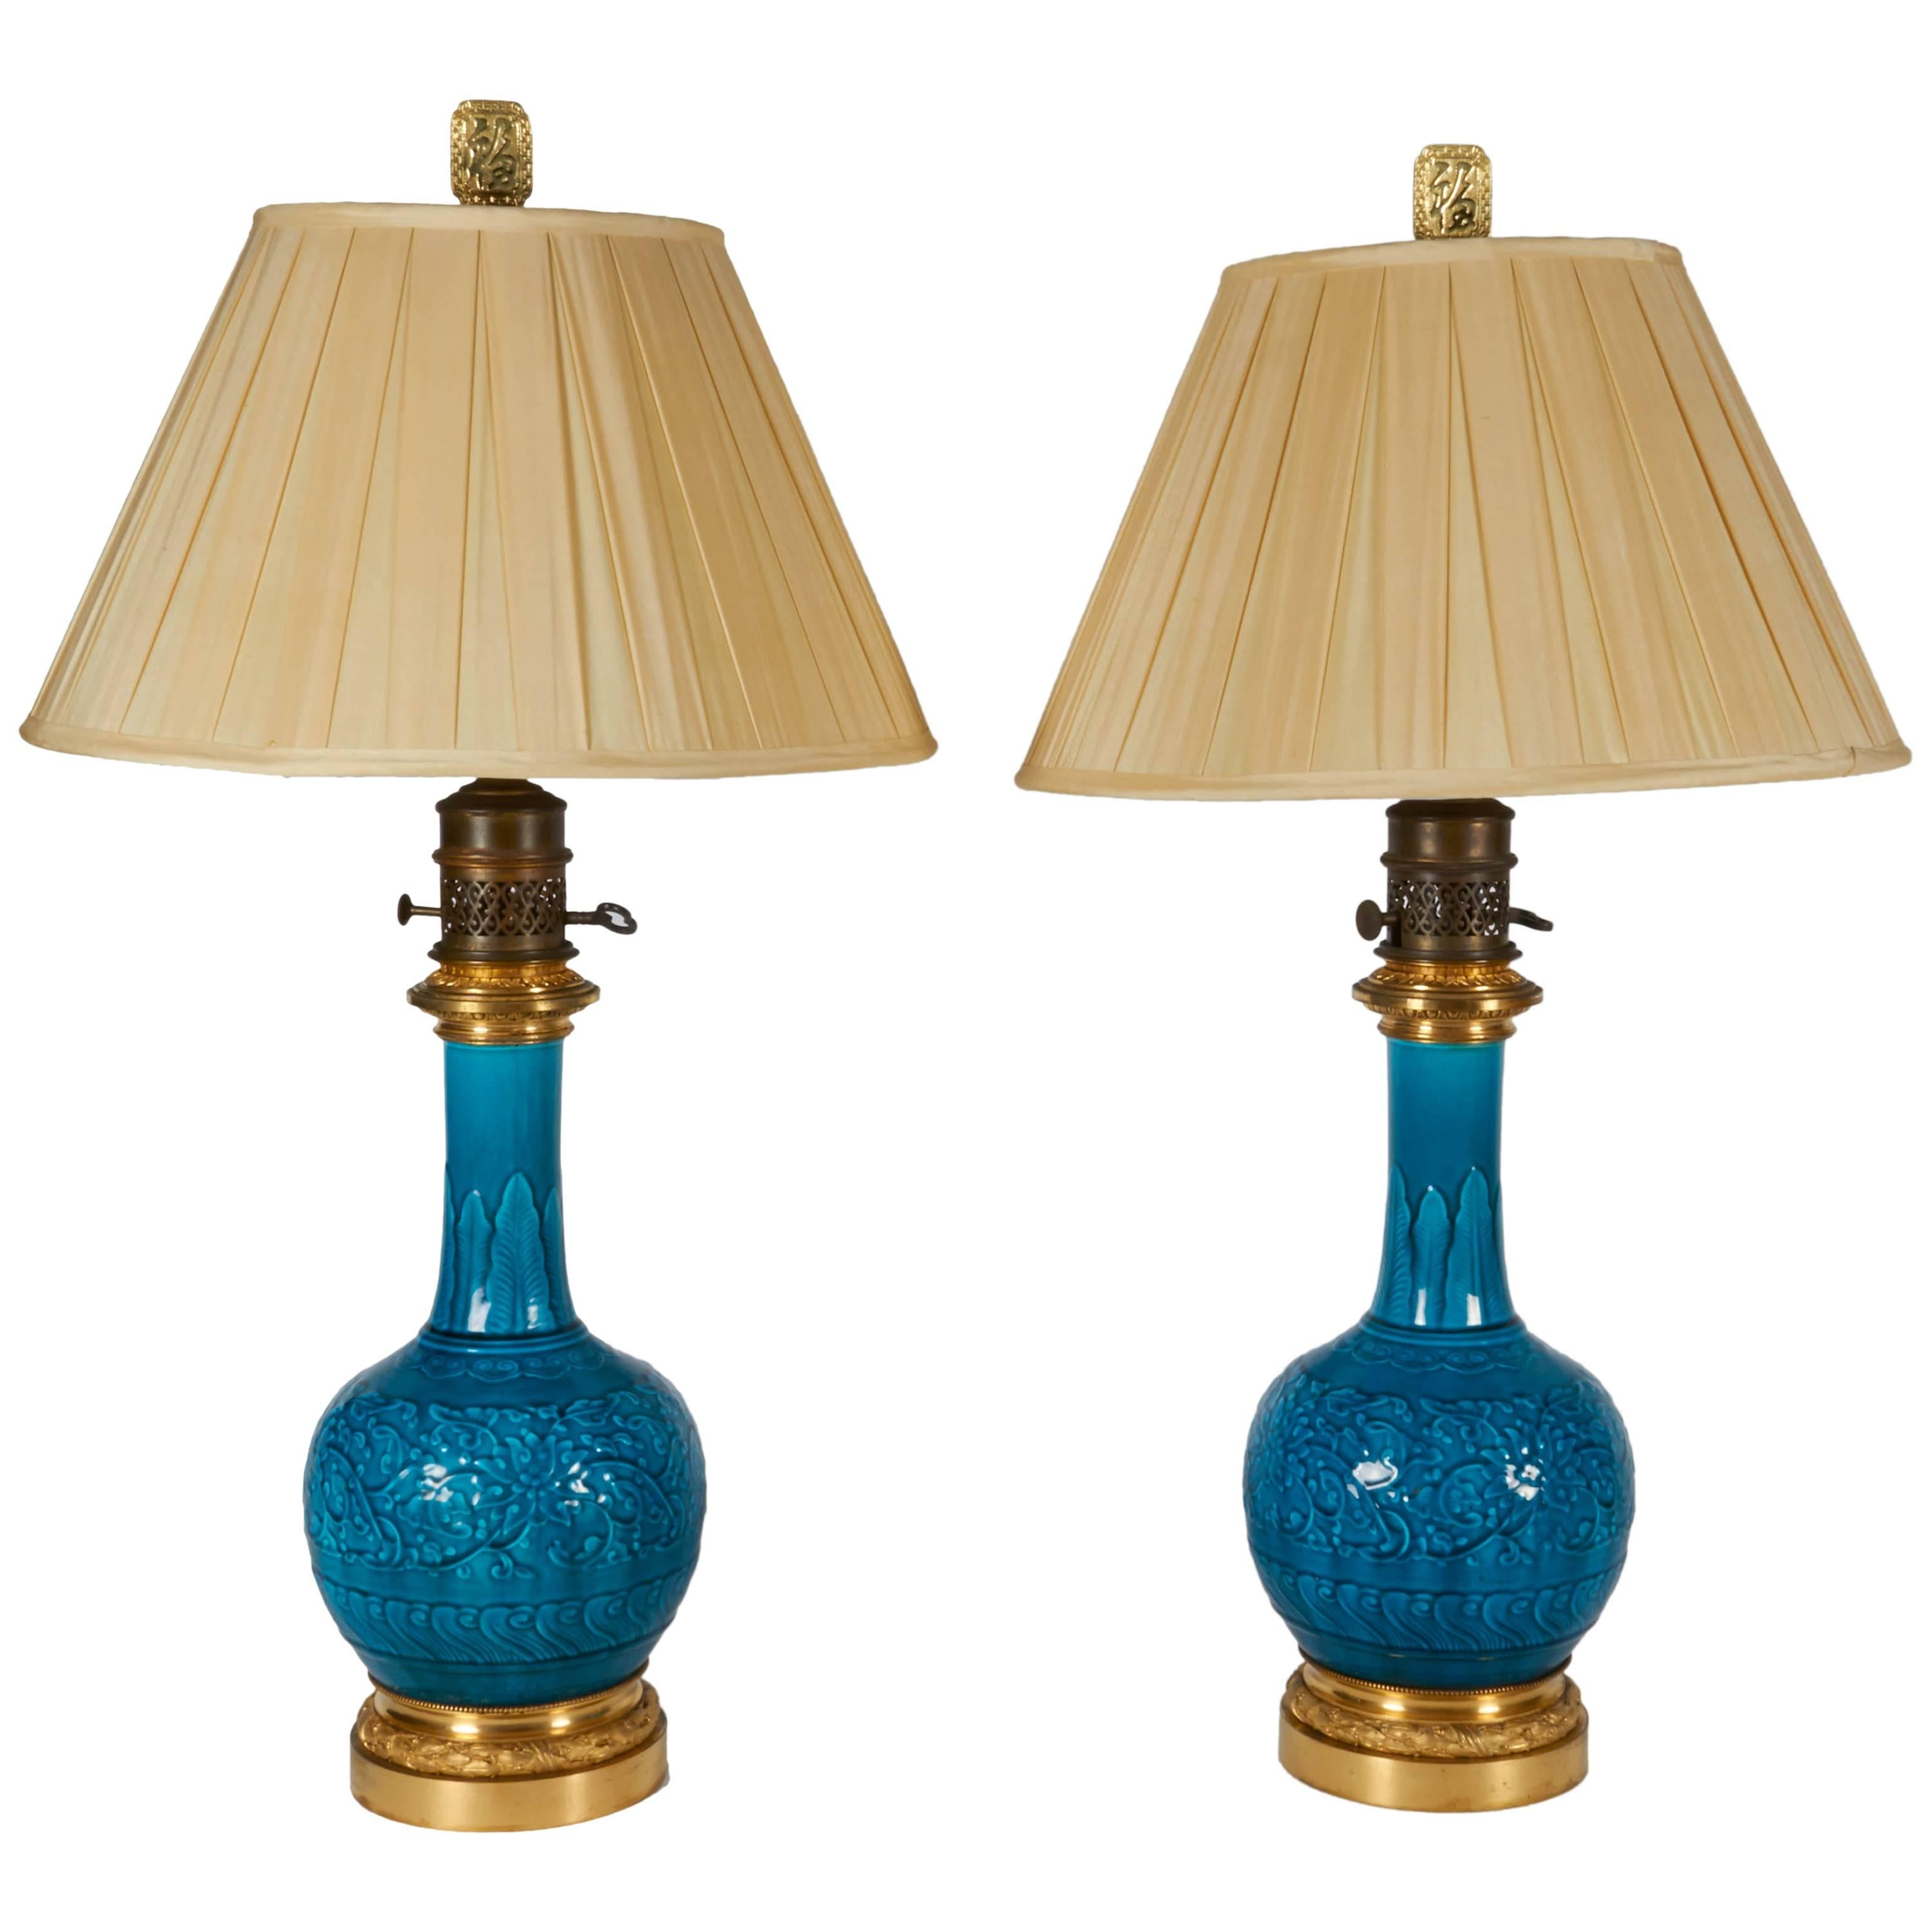 Pair of Blue Theodore Deck Porcelain and Ormolu-Mounted Vases/Lamps